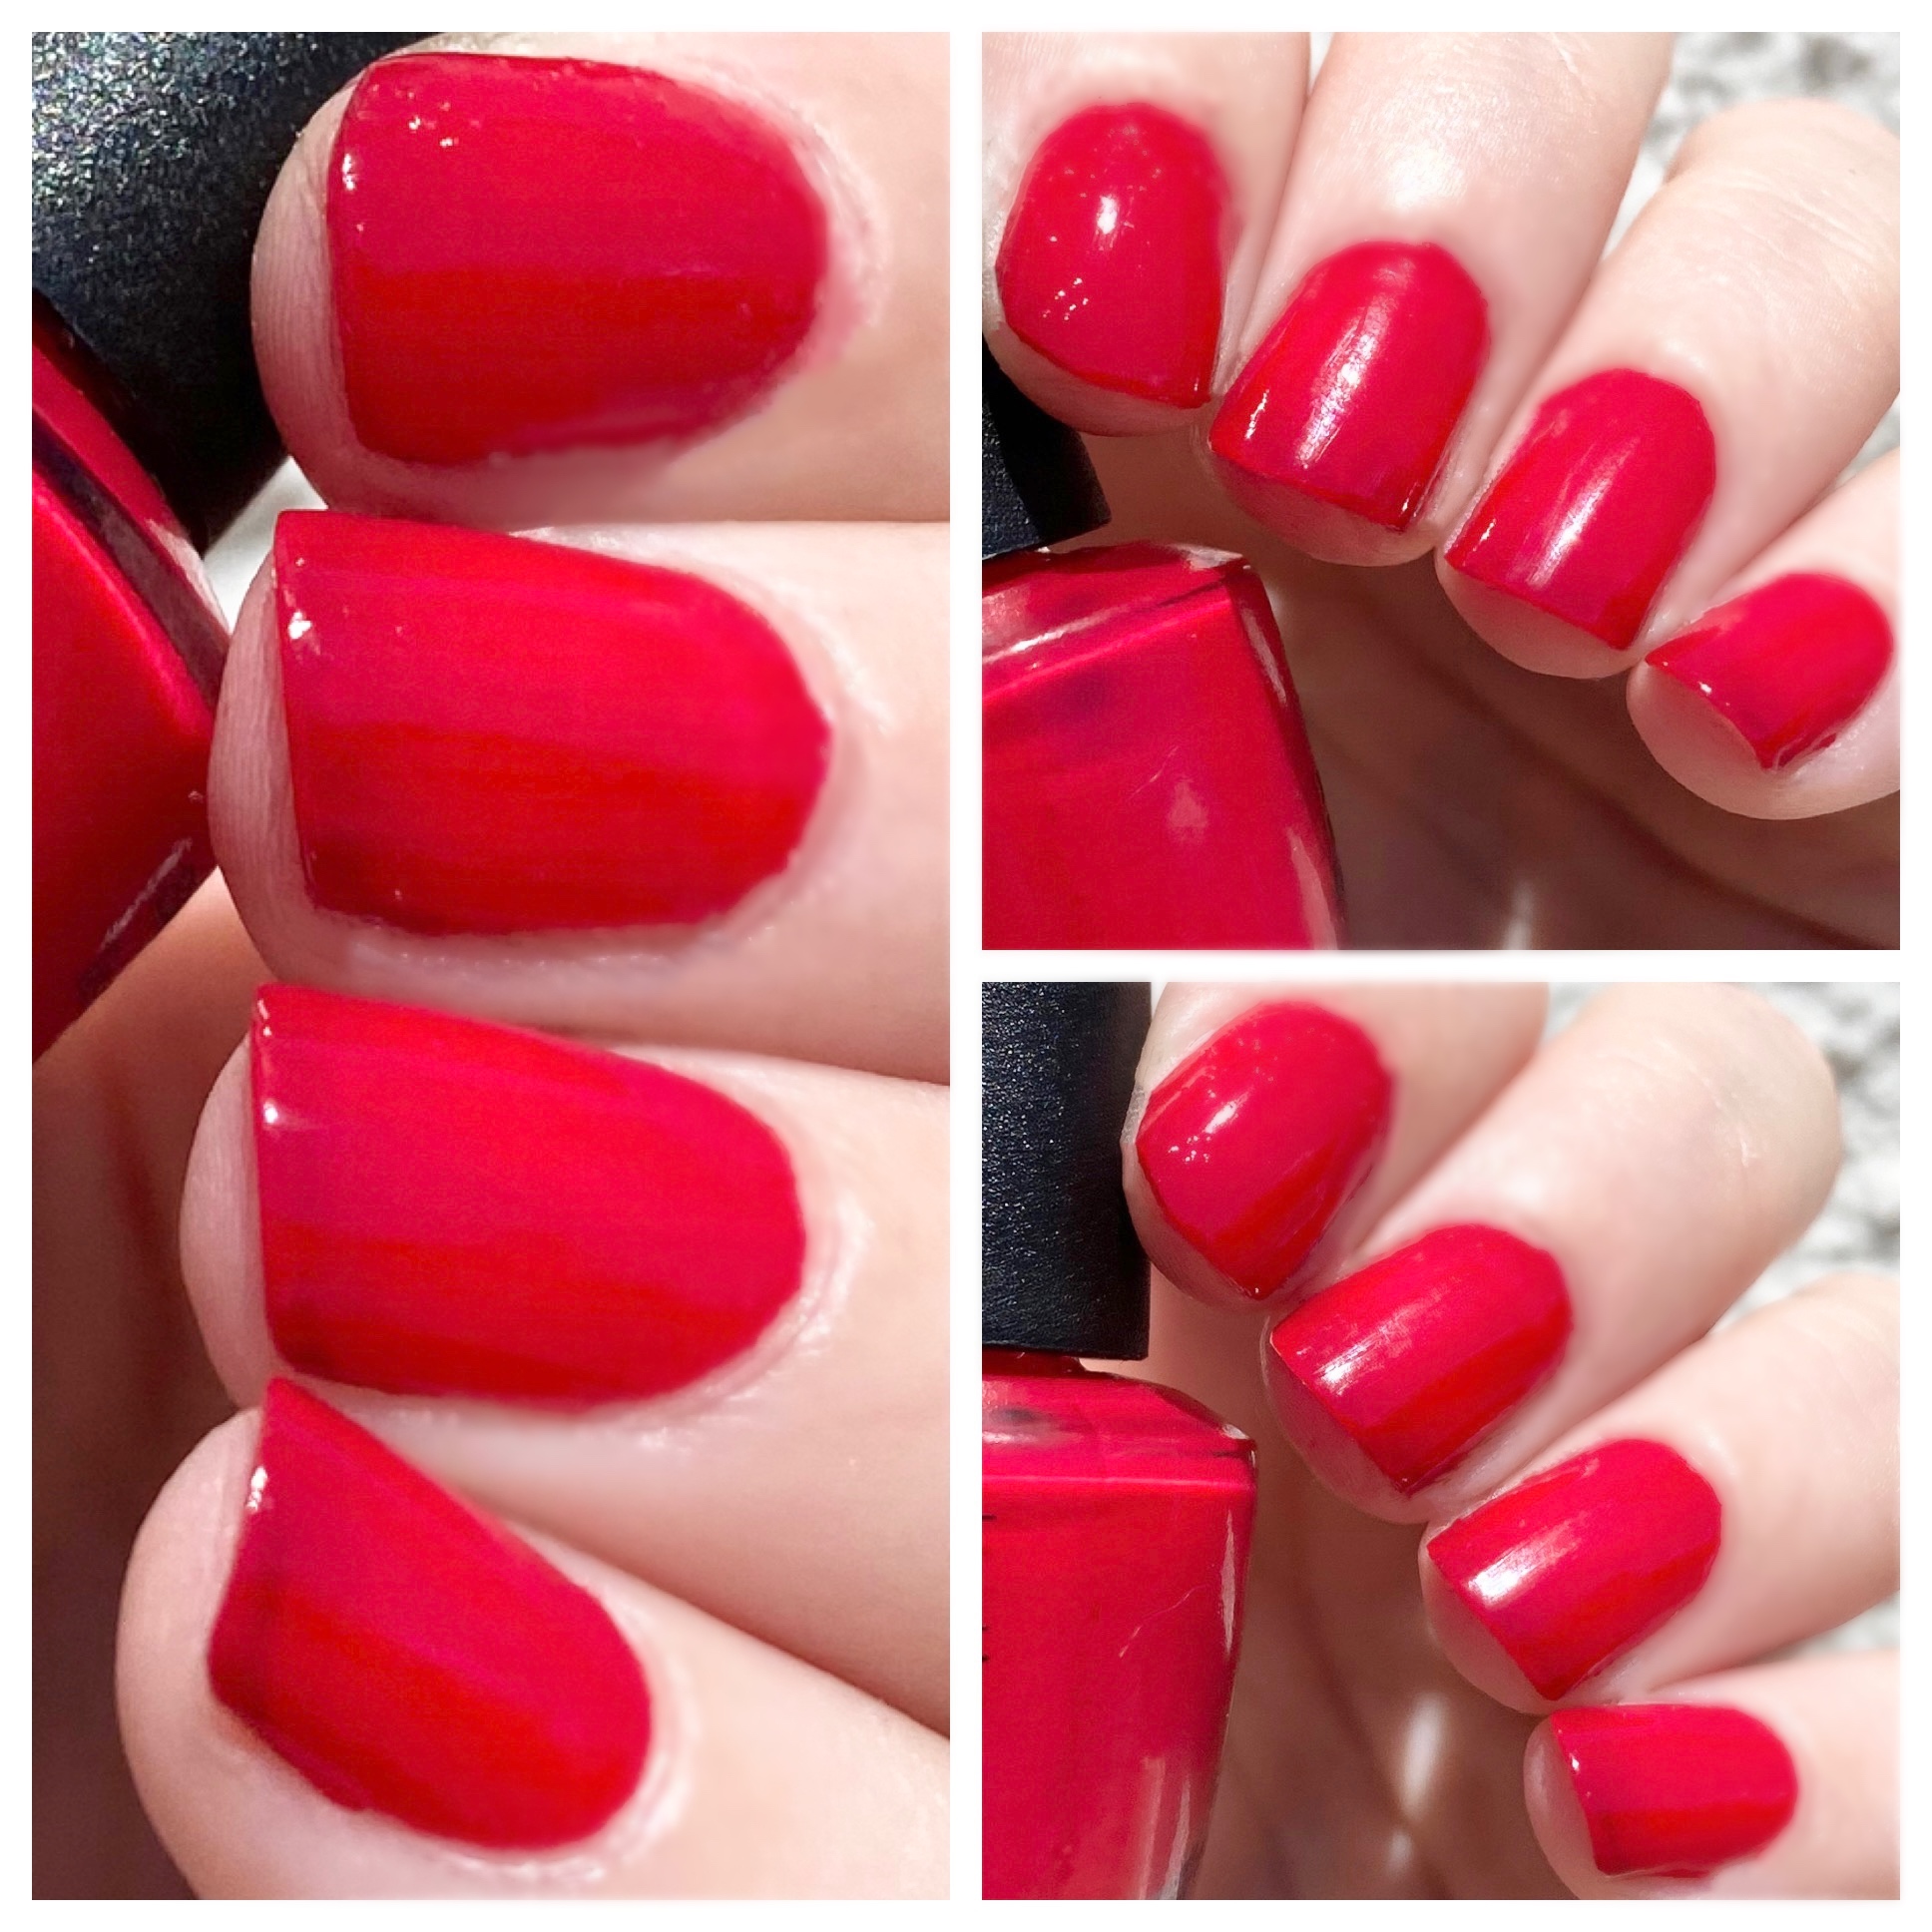 OPI, Bath & Body, Opi Candy Apple Red